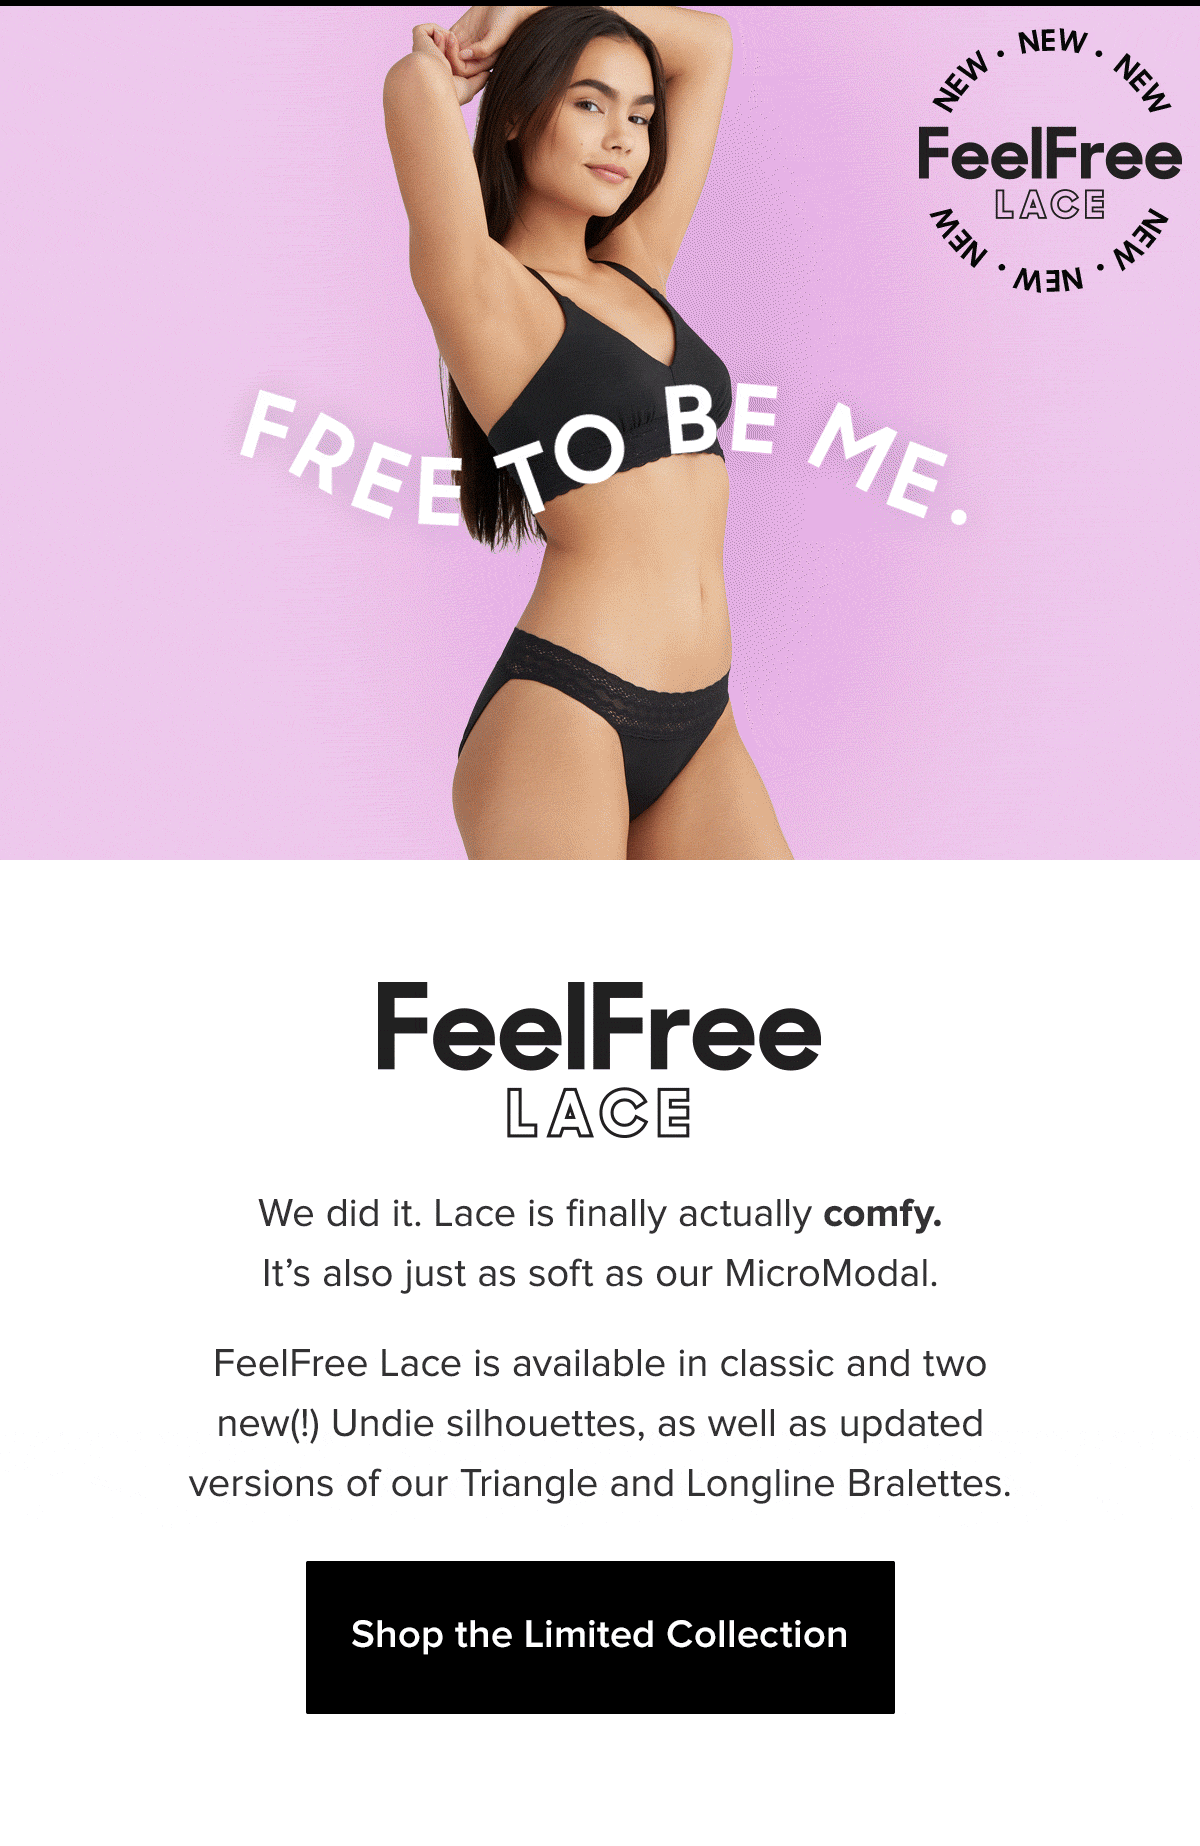 MeUndies - Our FeelFree Lace Triangle Bralette is comfy